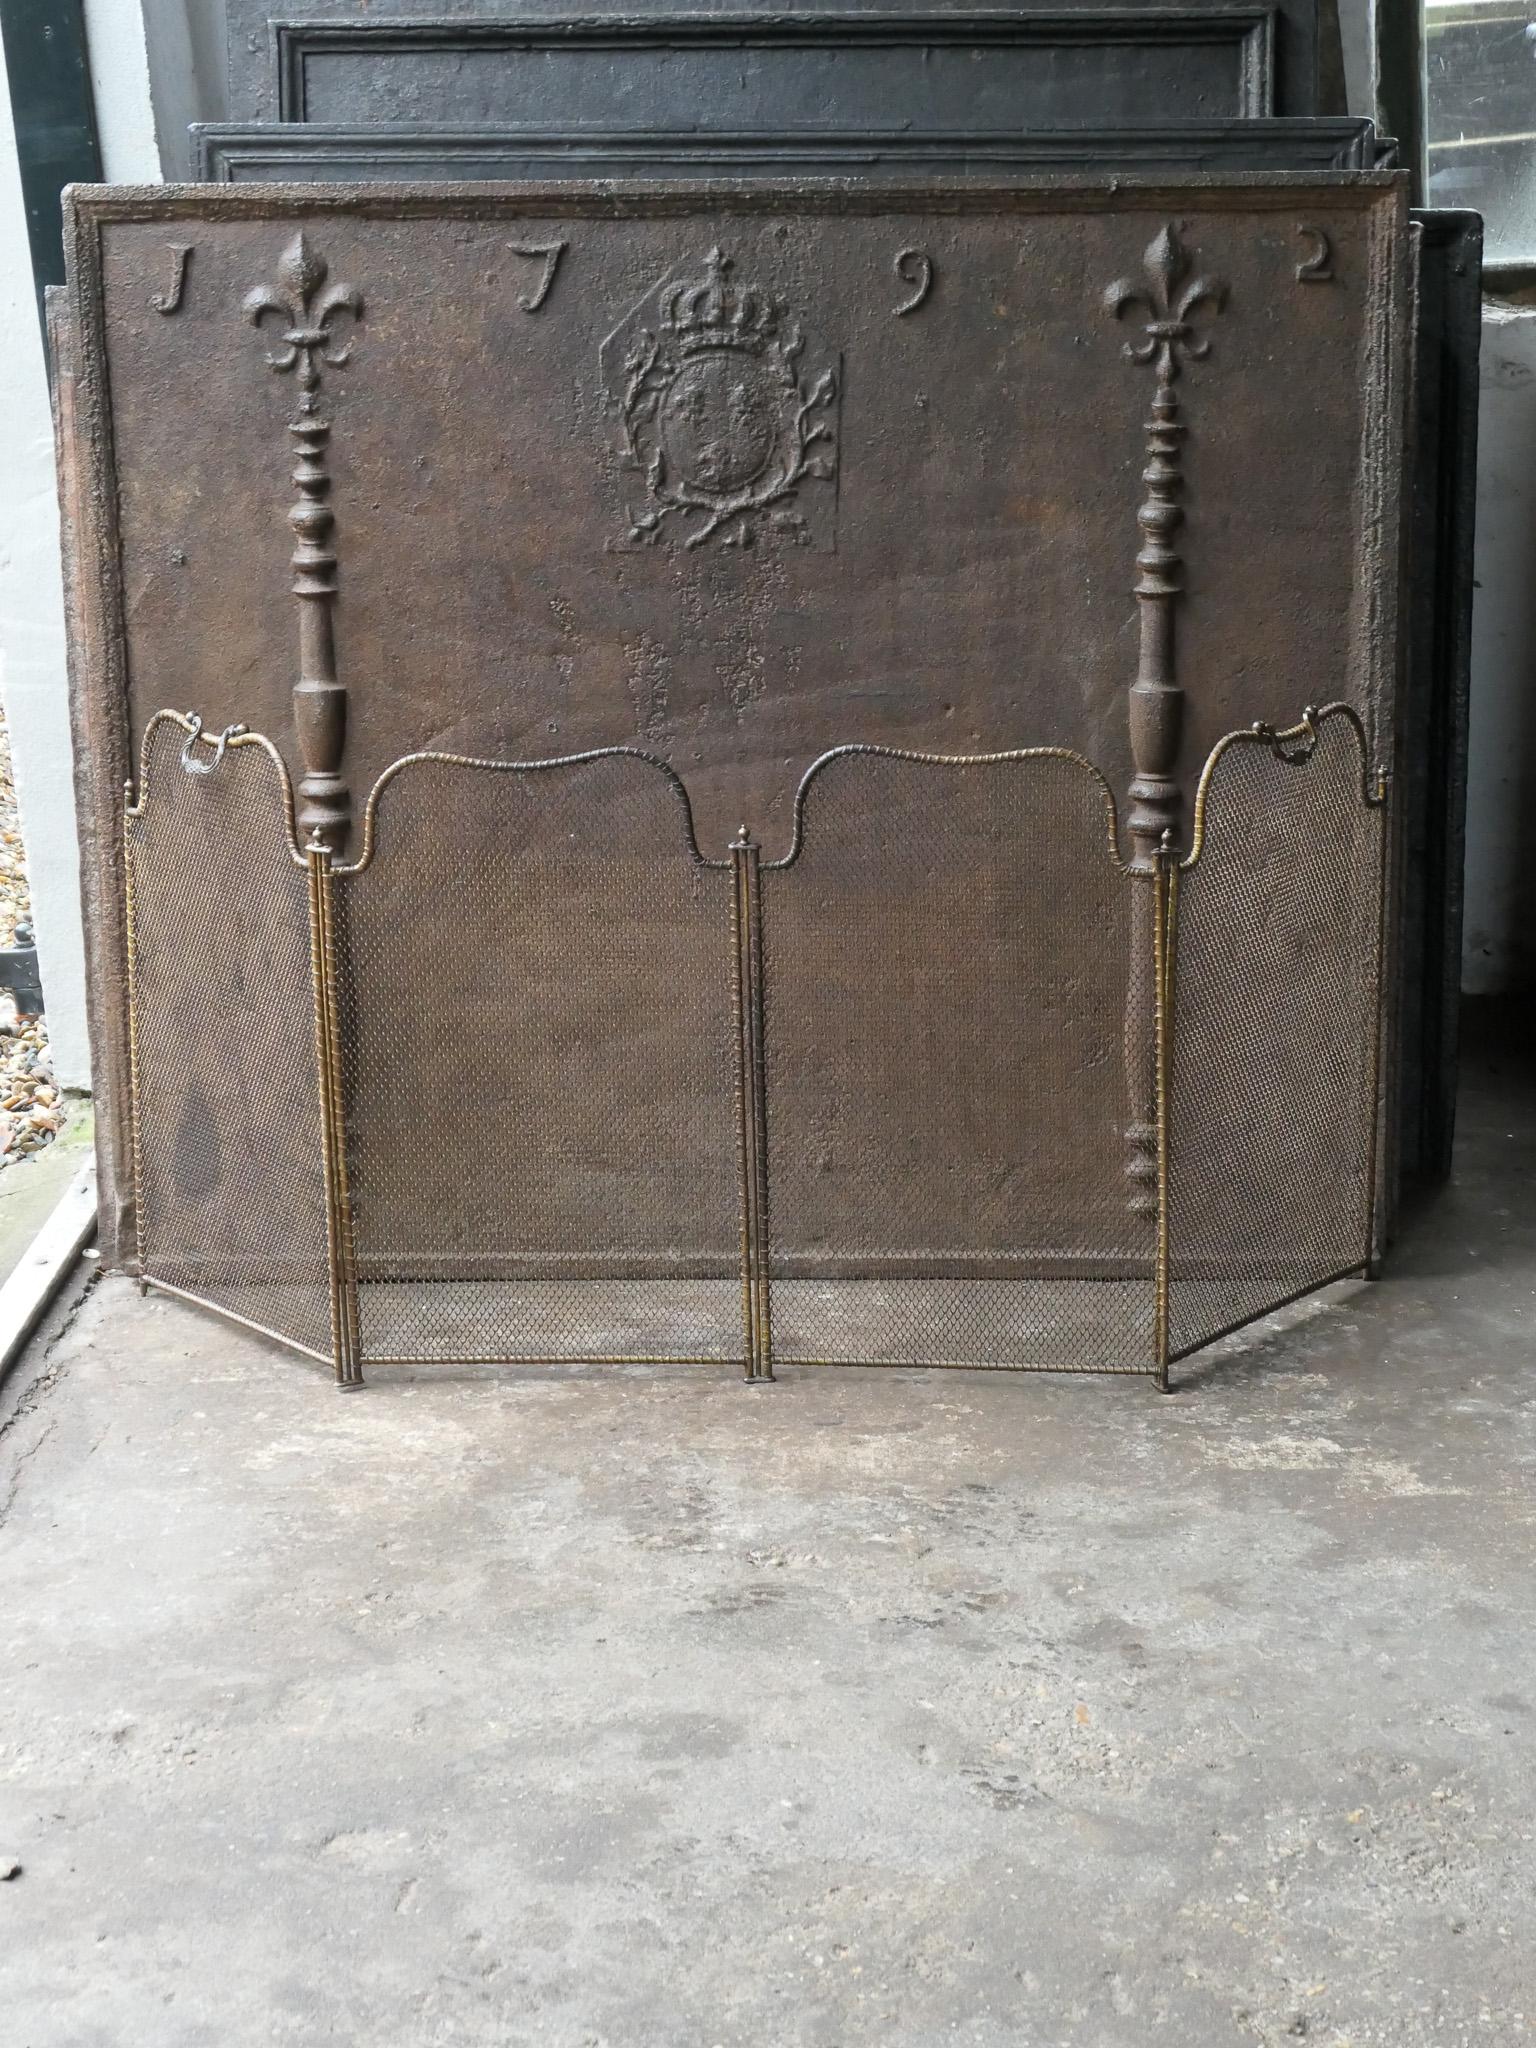 19th century French Napoleon III 4-panel fireplace screen. The screen is made of iron and iron mesh and has brass color. It is in a good condition and is fit for use in front of the fireplace.